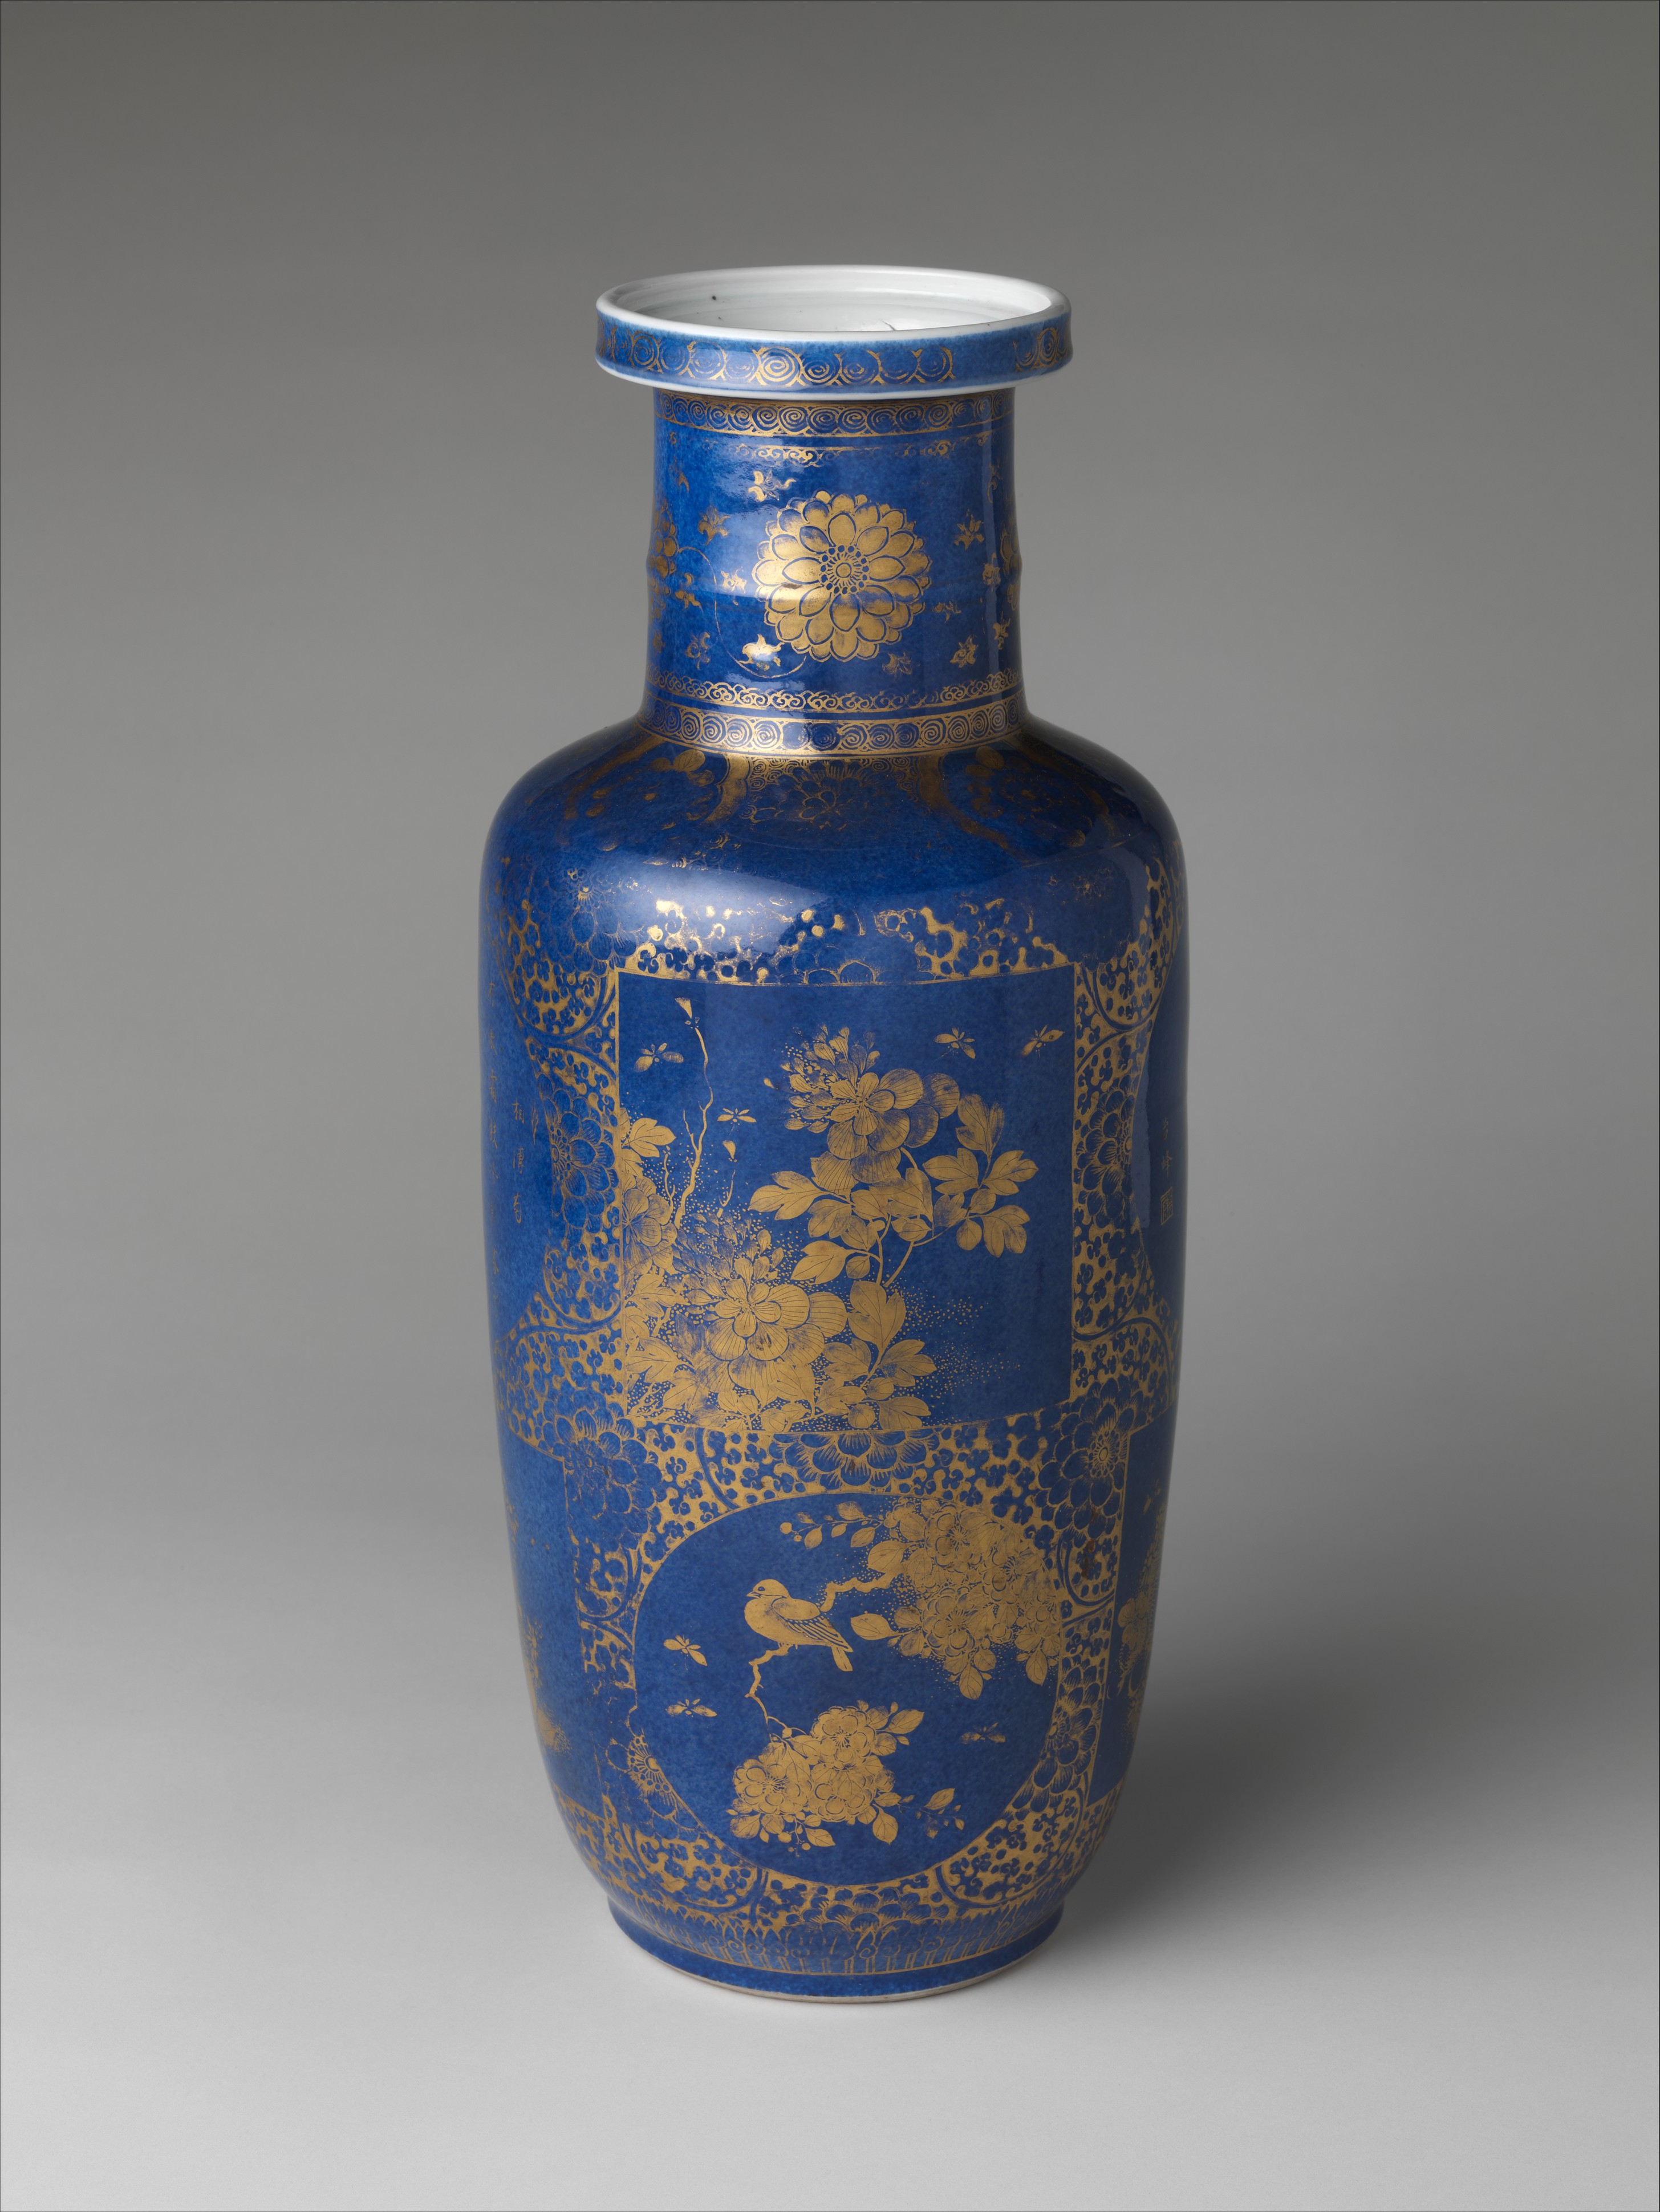 Vase decorated with flowers, birds, and poems | China | Qing 